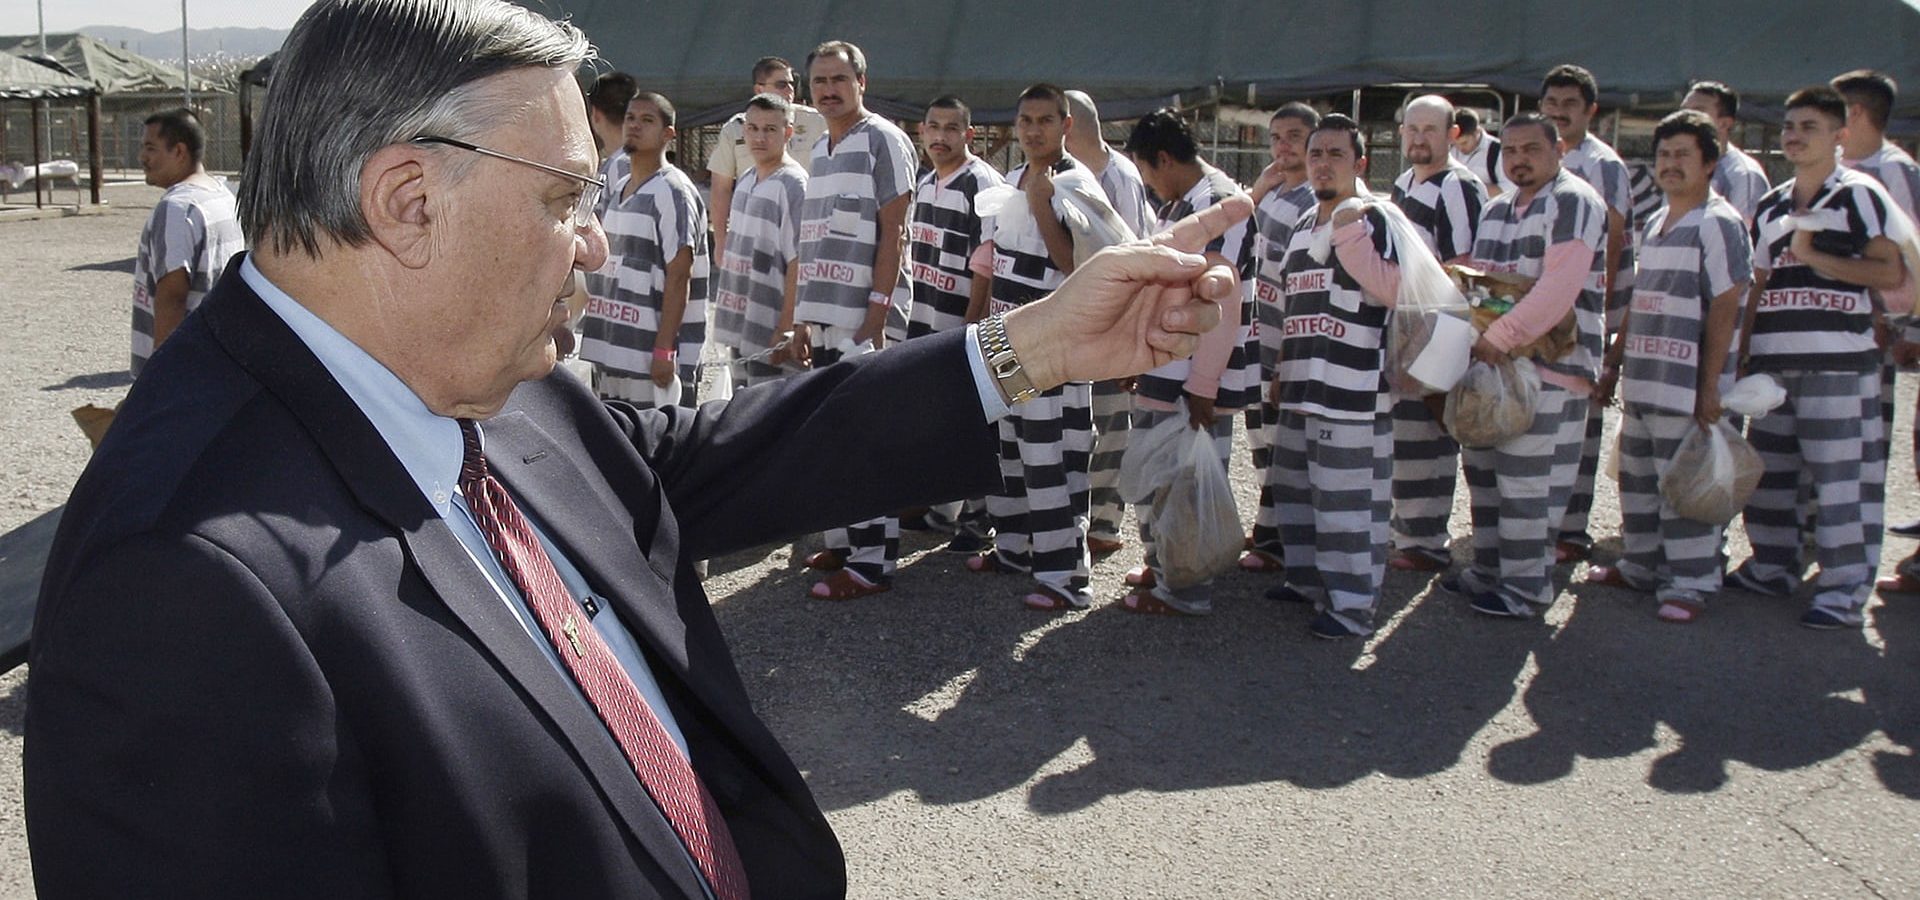 Joe Arpaio, who proclaimed himself ‘America’s toughest sheriff’, showing detainees at the Tent City facility to the media in 2009. (Photo: Ross D. Franklin/AP)